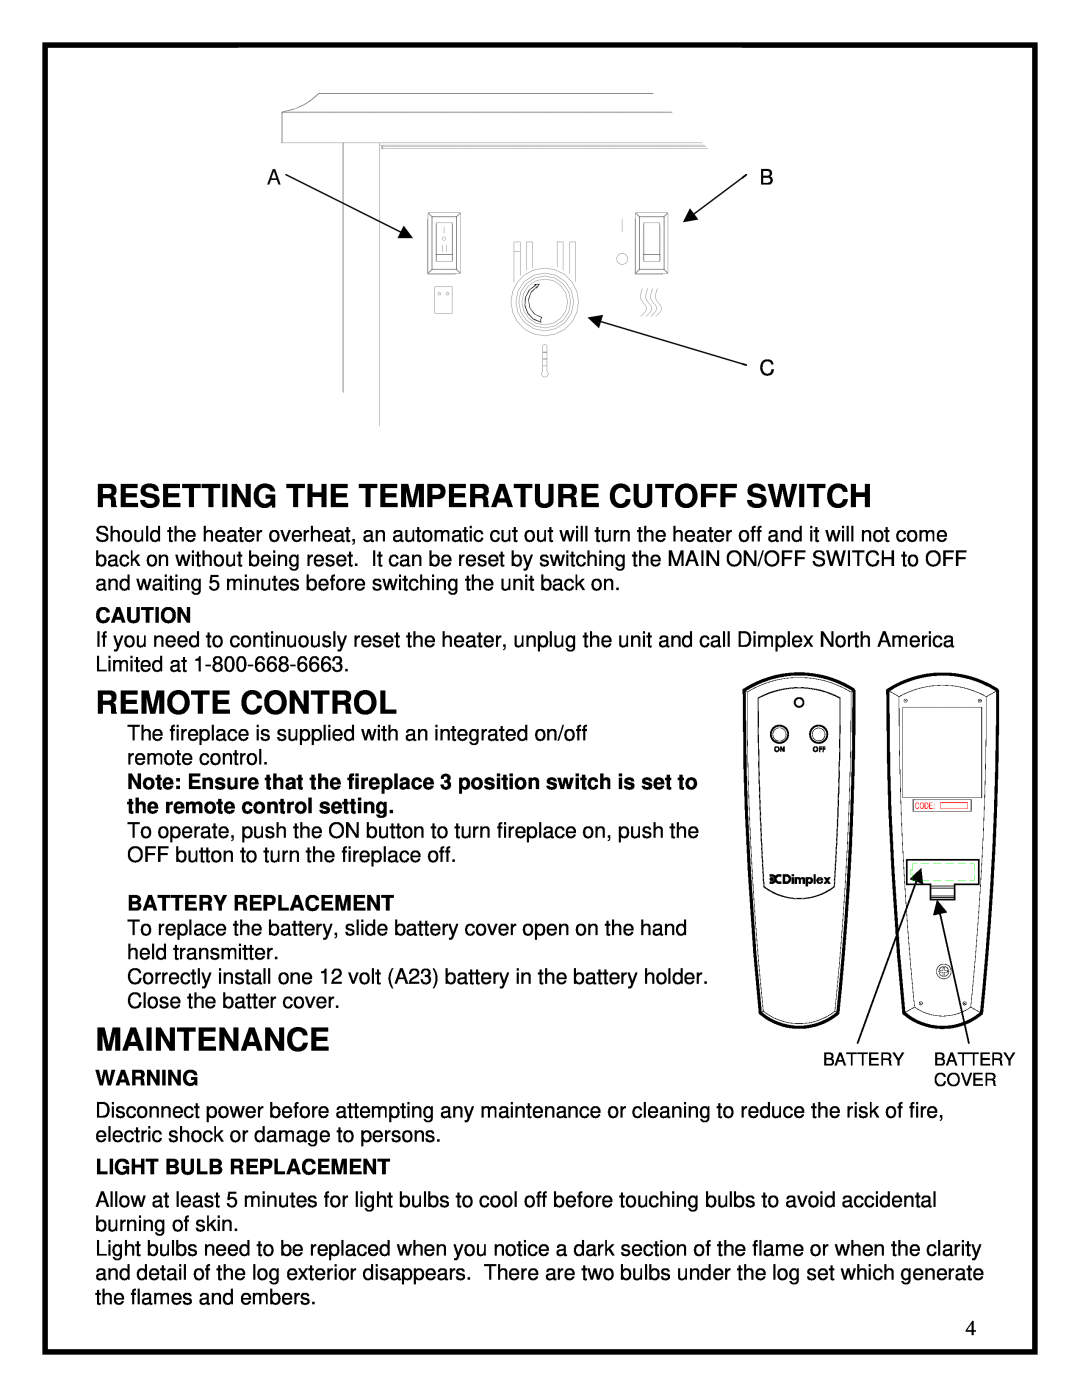 Dimplex DS5629 manual Resetting The Temperature Cutoff Switch, Remote Control, Maintenance, Battery Replacement 